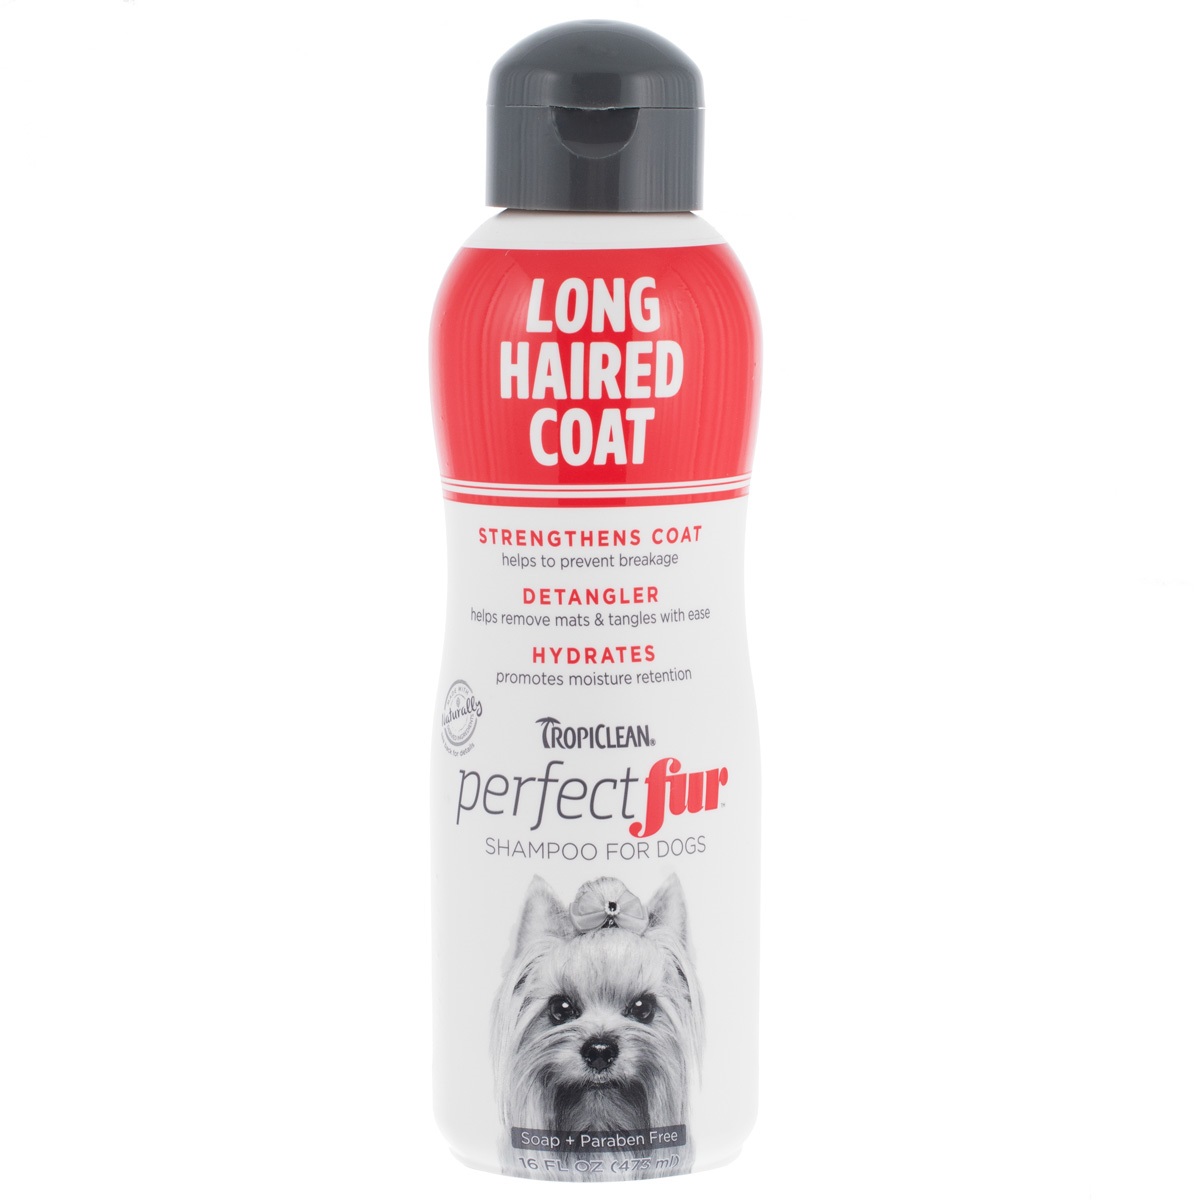 TropiClean Perfect Fur Long Haired Coat Shampoo - The Mutty Professor